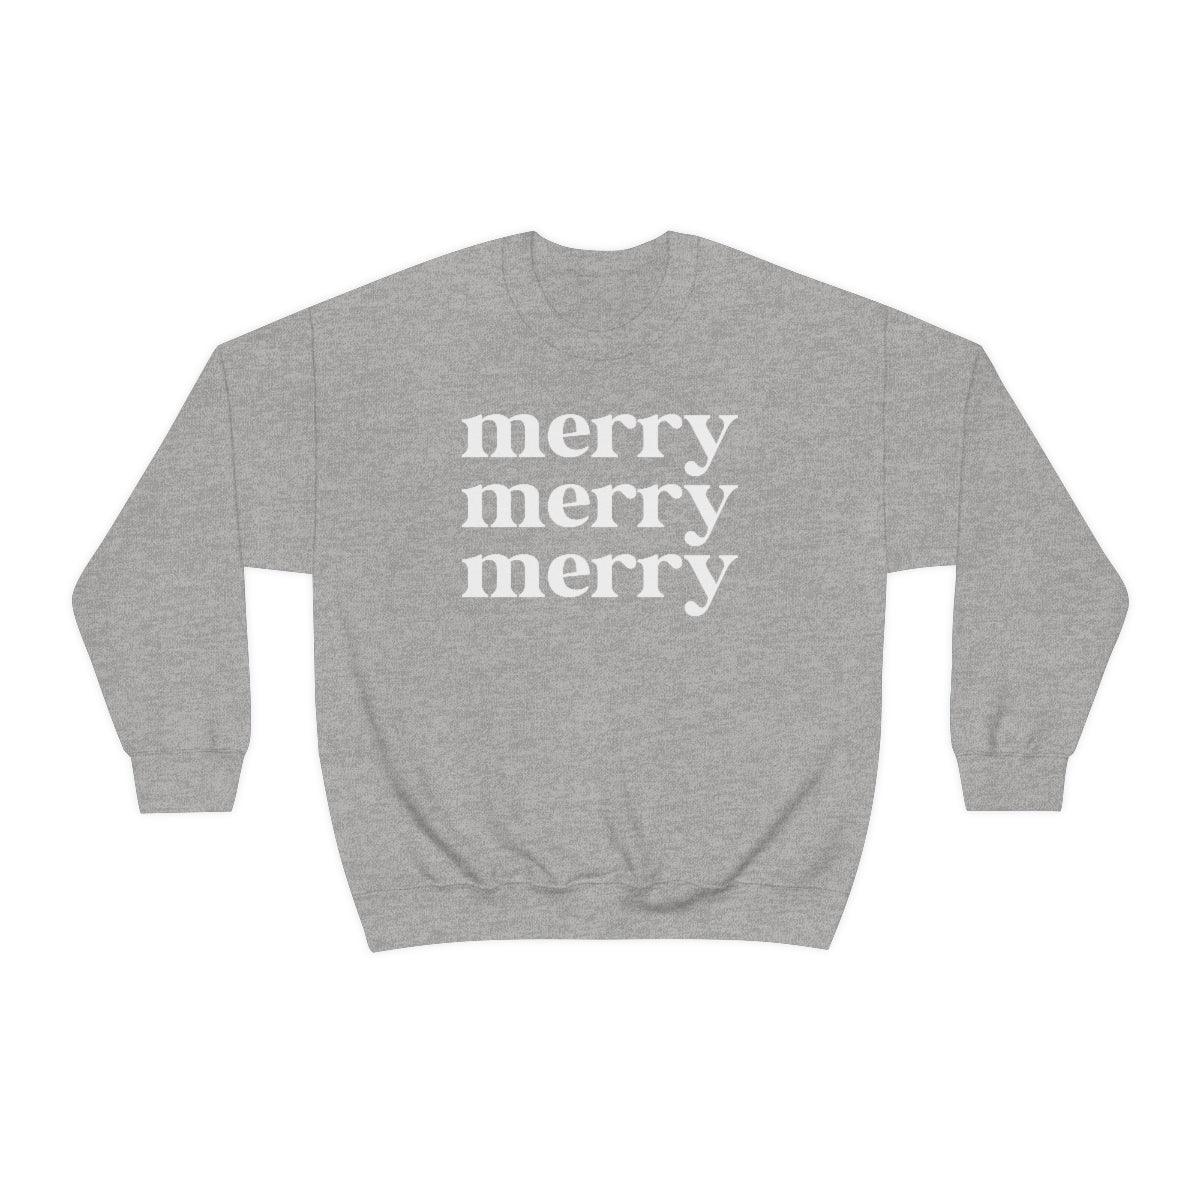 Merry Merry Merry Christmas Crewneck Sweater - Crystal Rose Design Co.